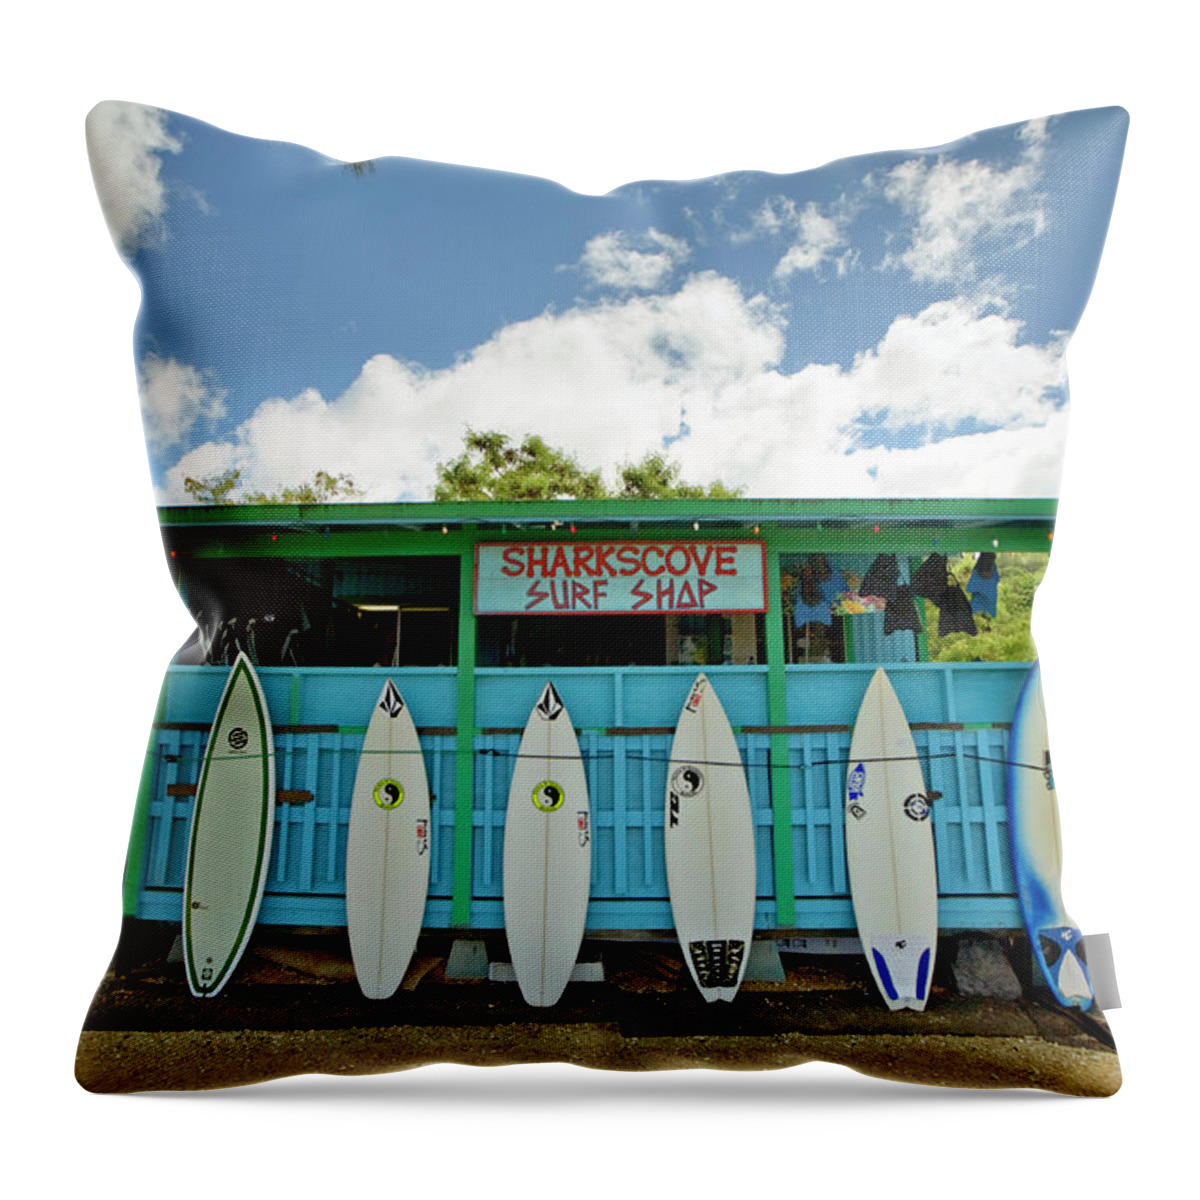 Summer Throw Pillow featuring the photograph Sharks Cove Surf Shop With New by Merten Snijders